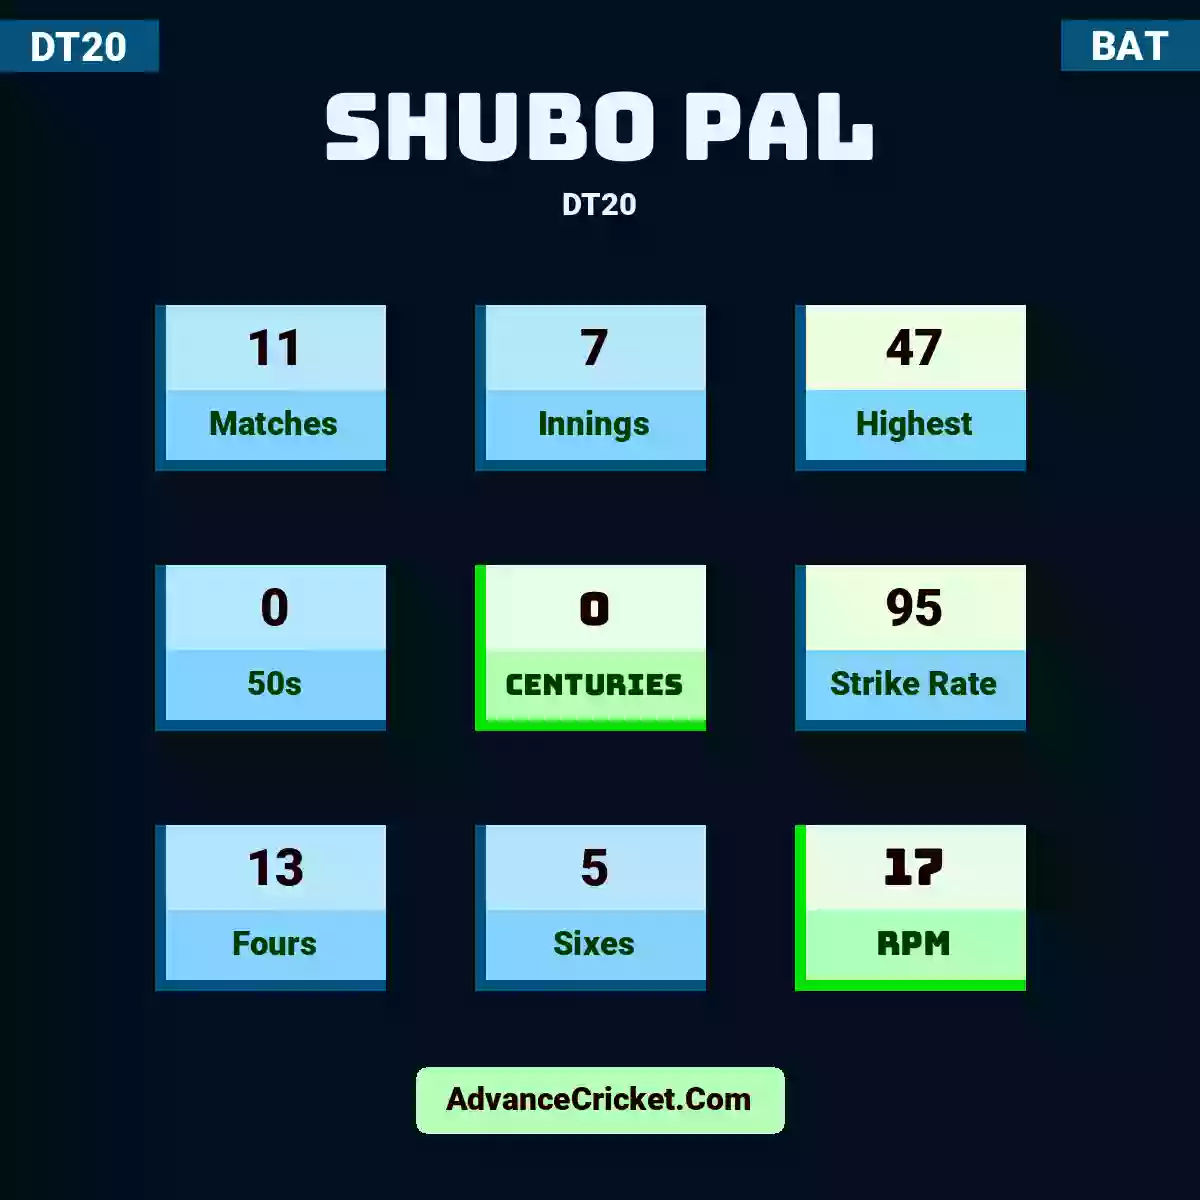 Shubo Pal DT20 , Shubo Pal played 11 matches, scored 47 runs as highest, 0 half-centuries, and 0 centuries, with a strike rate of 95. S.Pal hit 13 fours and 5 sixes, with an RPM of 17.